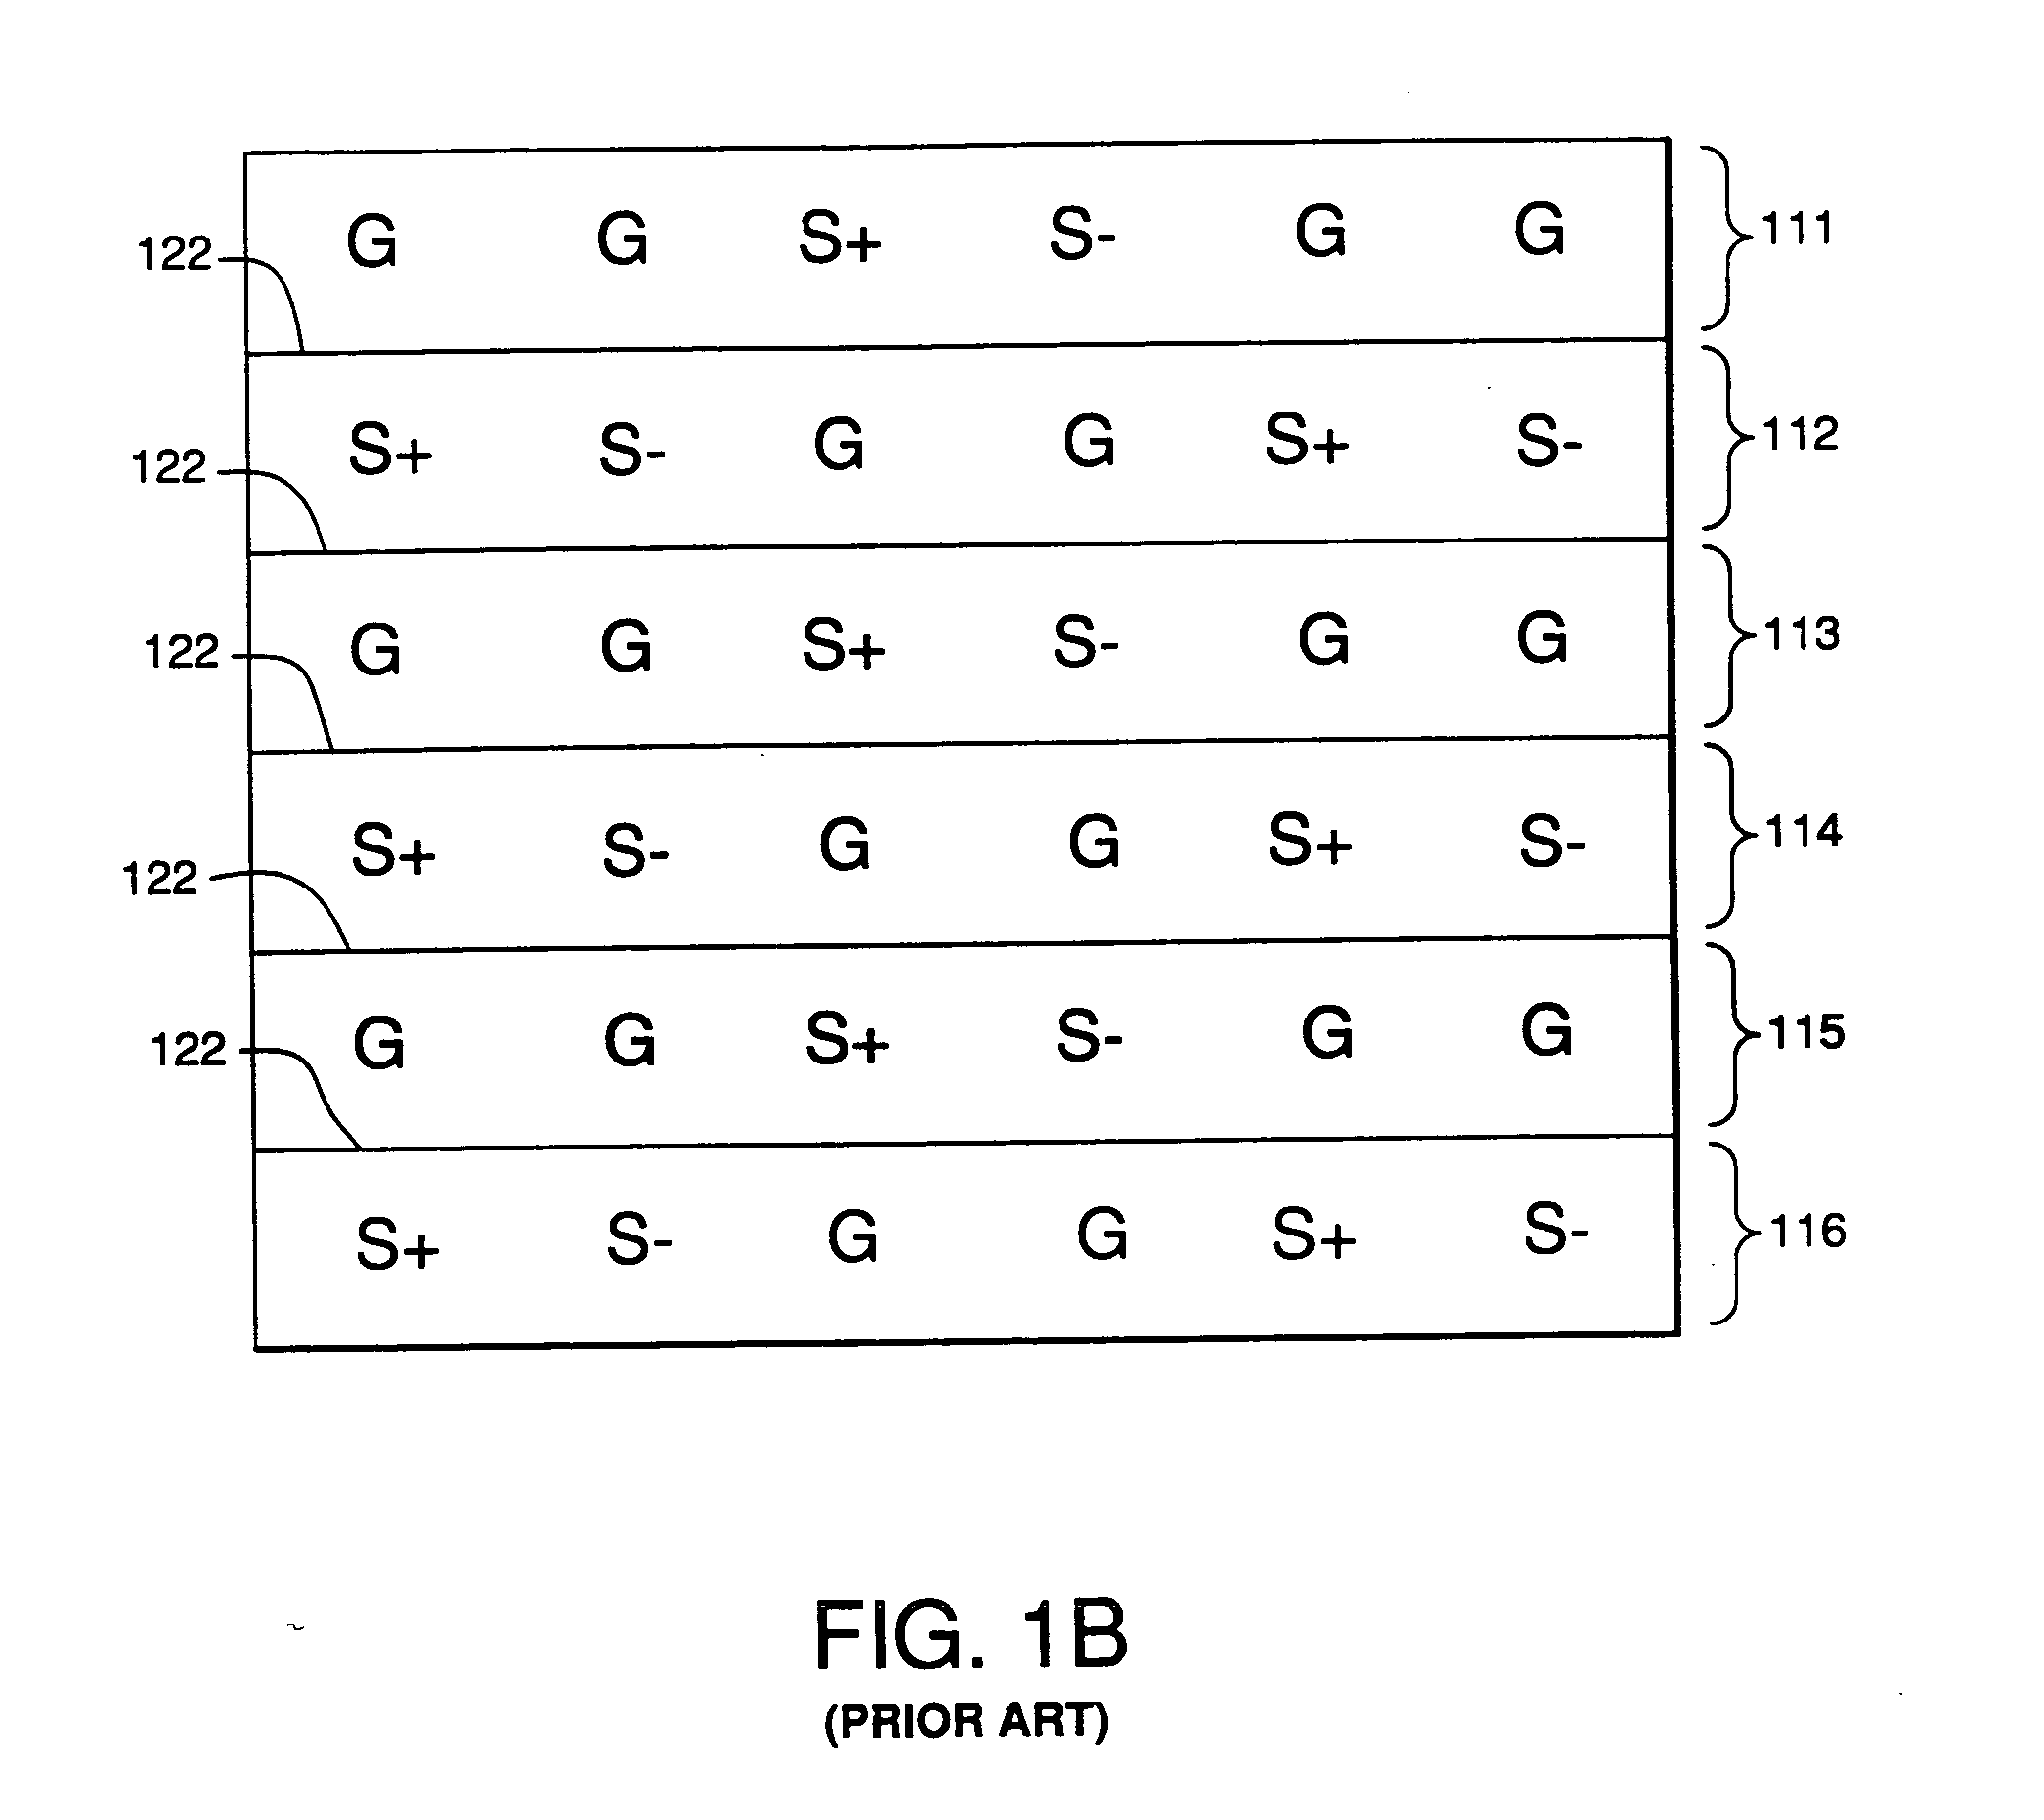 Electrical connectors having differential signal pairs configured to reduce cross-talk on adjacent pairs